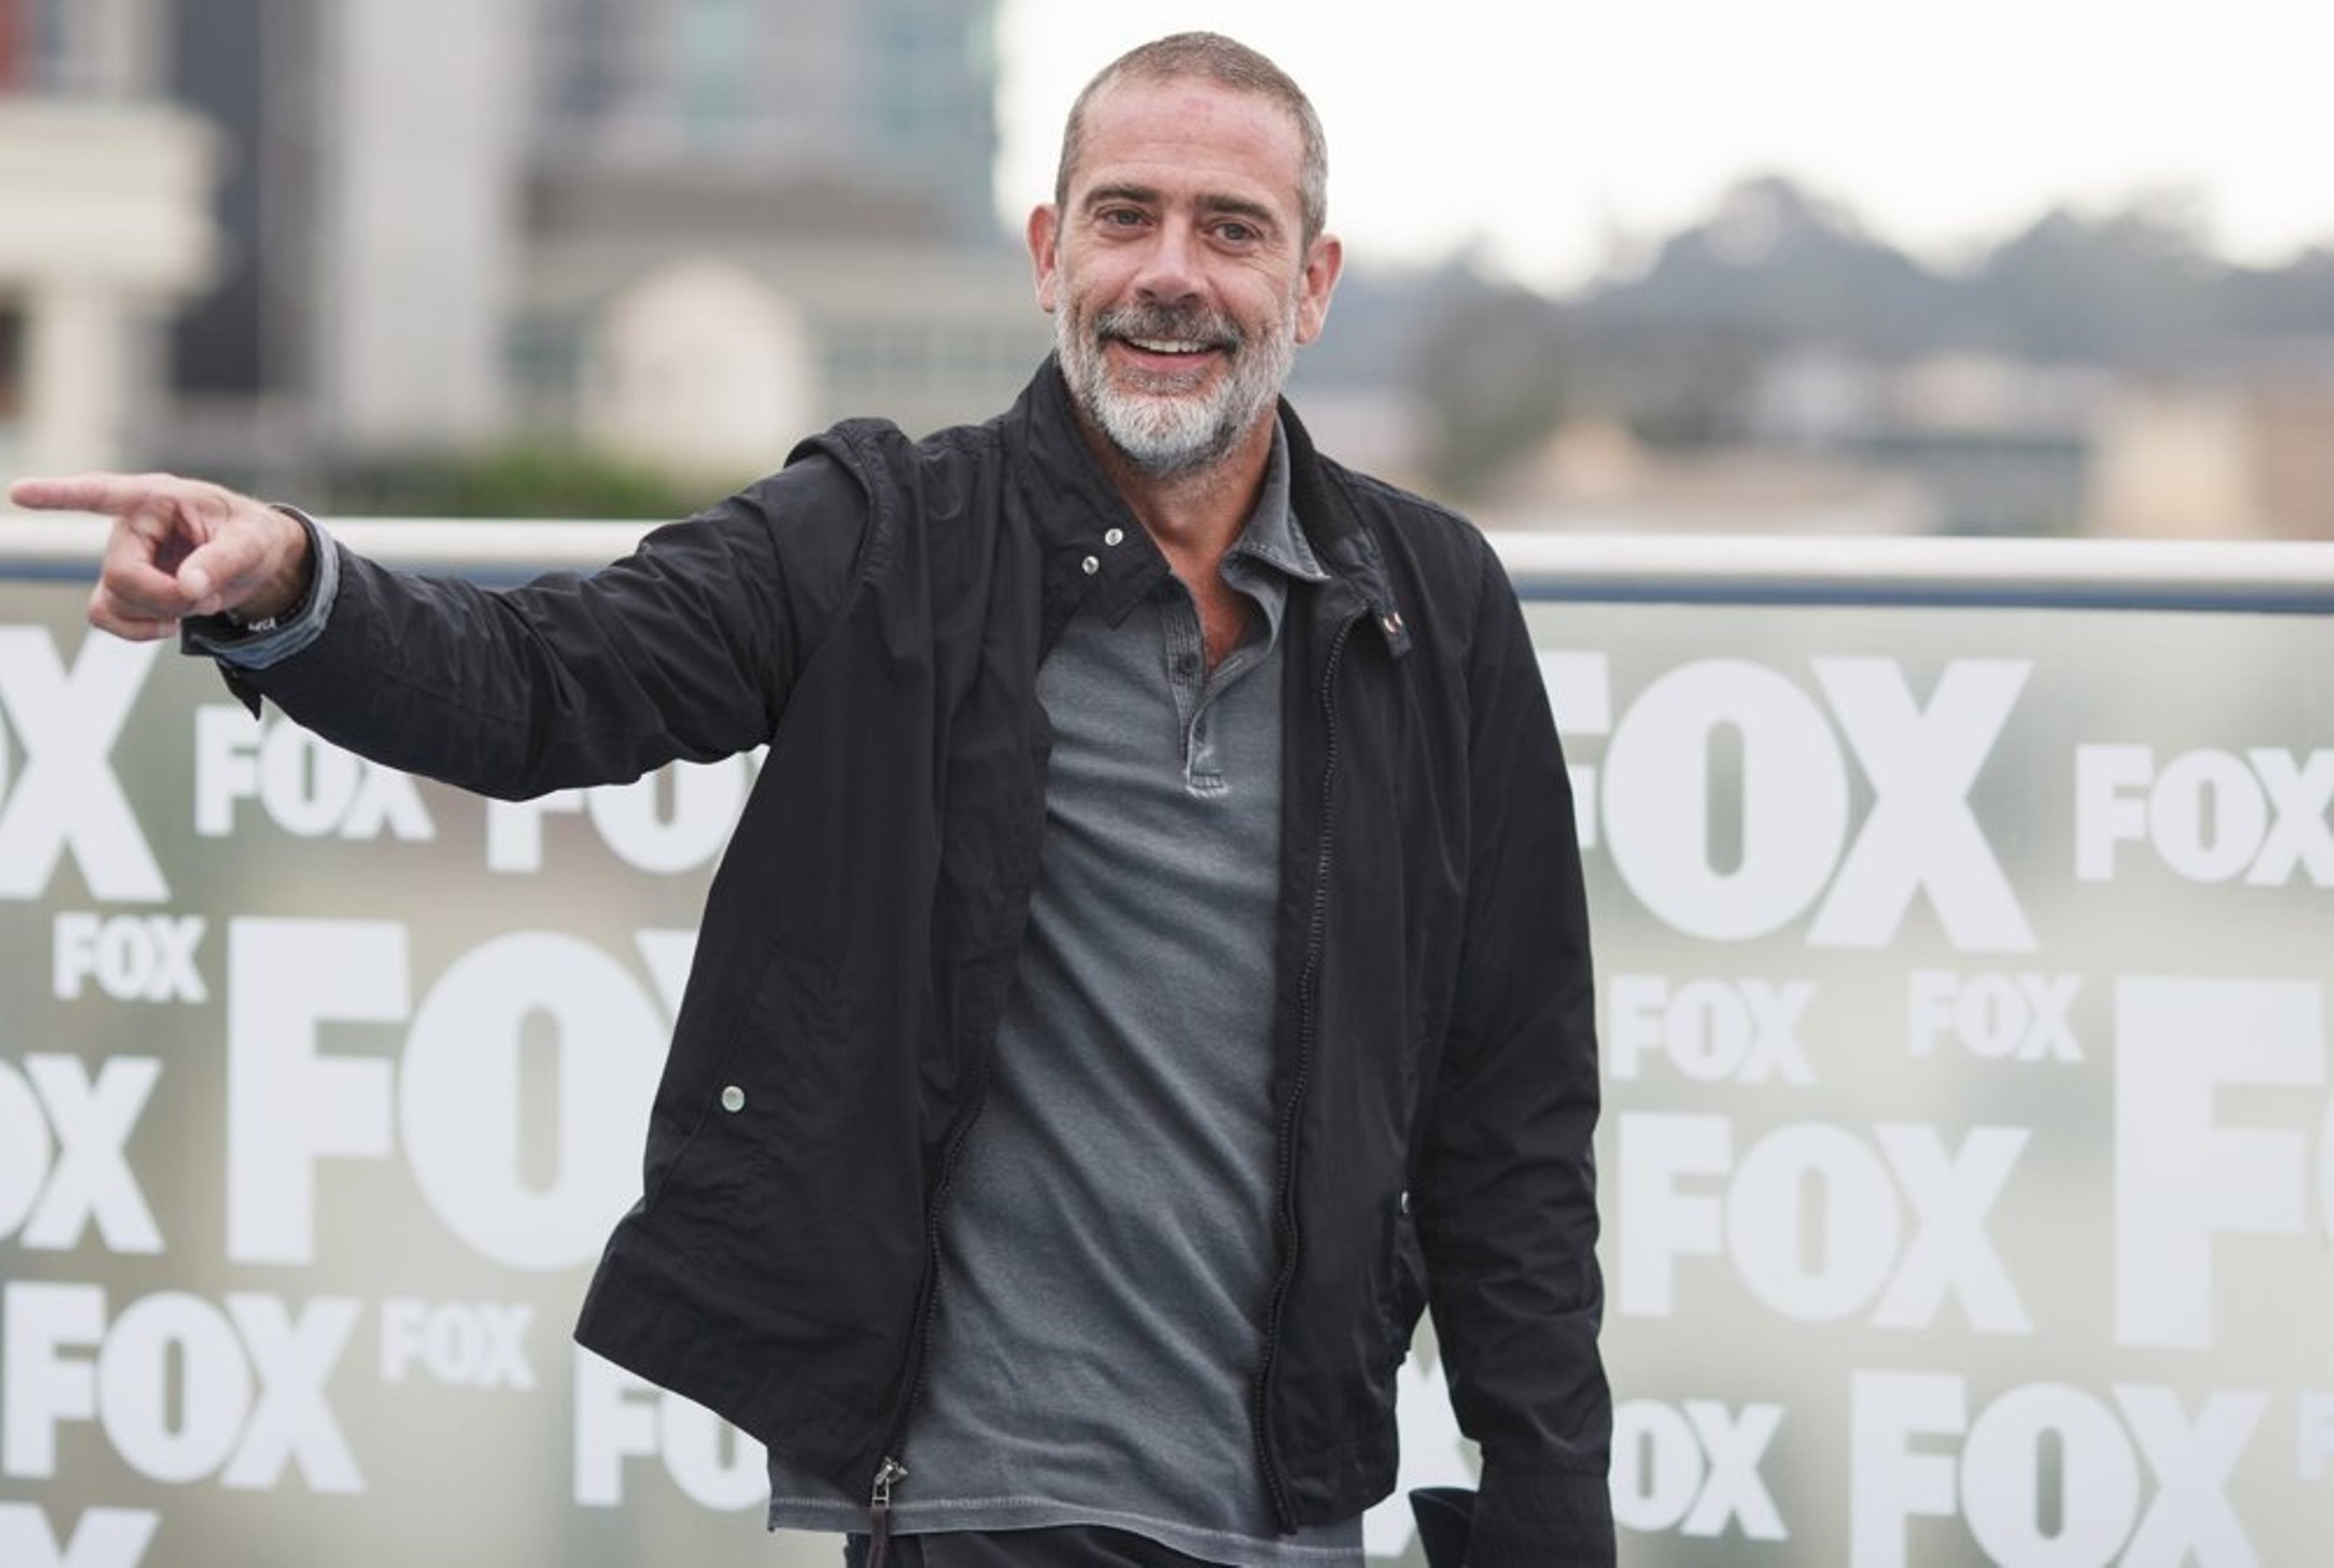 Is Jeffrey Morgan coming on board for a special role in The Boys Season 4